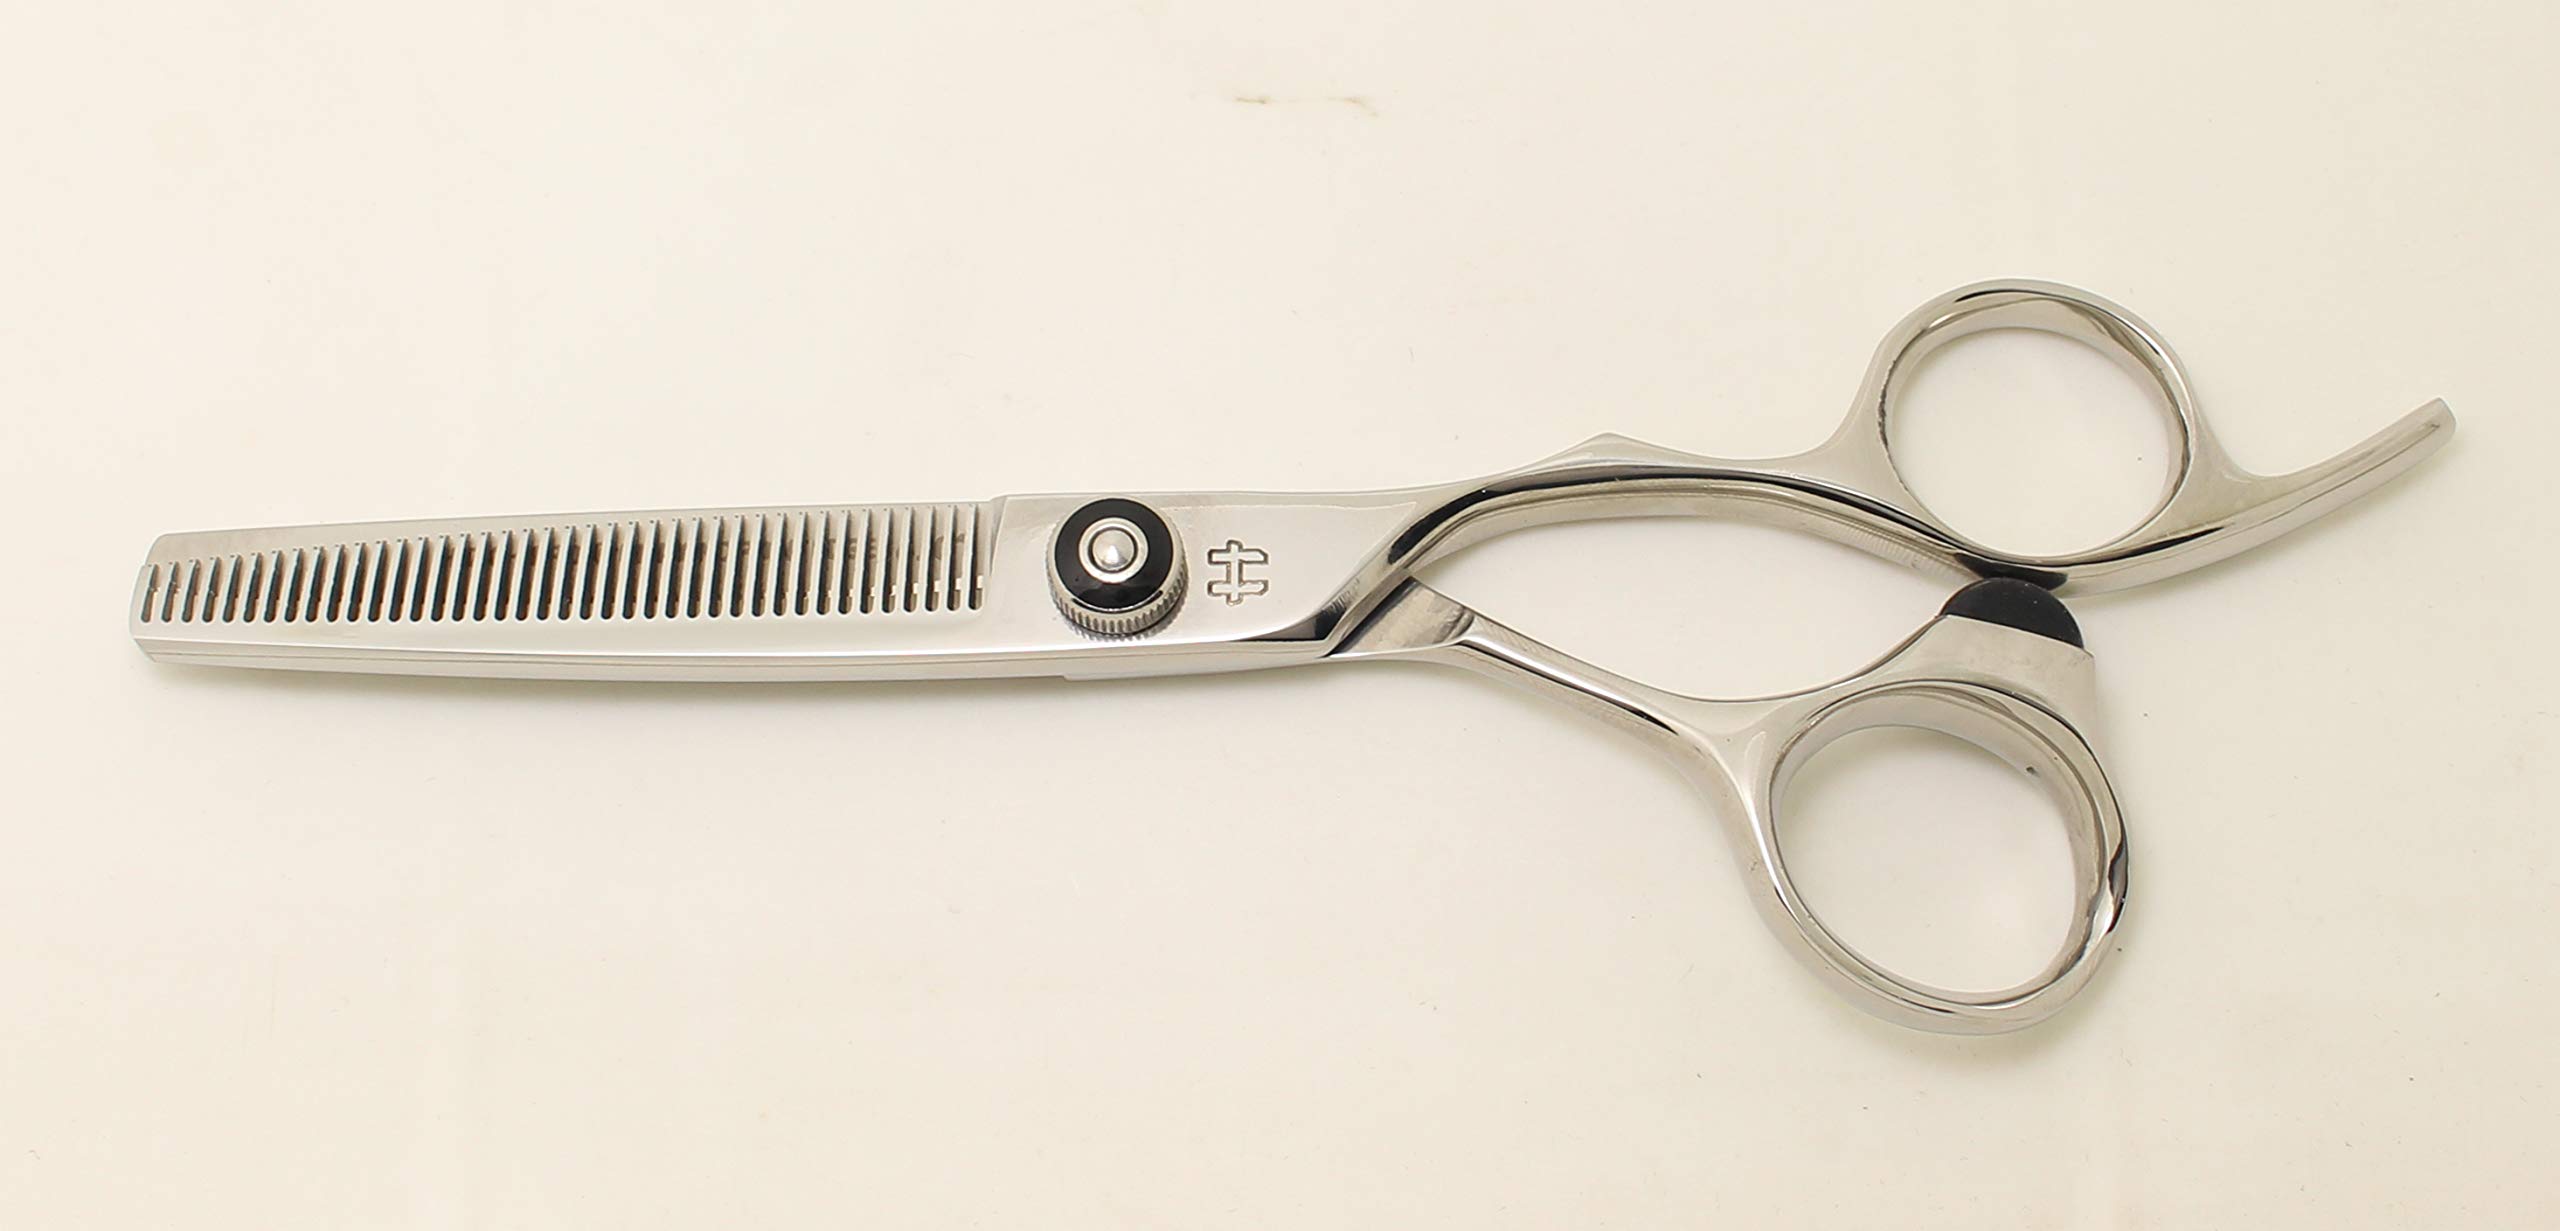 Hitachi Pro Japanese Stainless Steel Professional Thinning Shears-Scissors/Texturizing & Haircut Thinning/Aircraft Alloy Handle/40 Hair Cutting Teeth/Salon/Stylist/Cosmetology/Barber-6.0